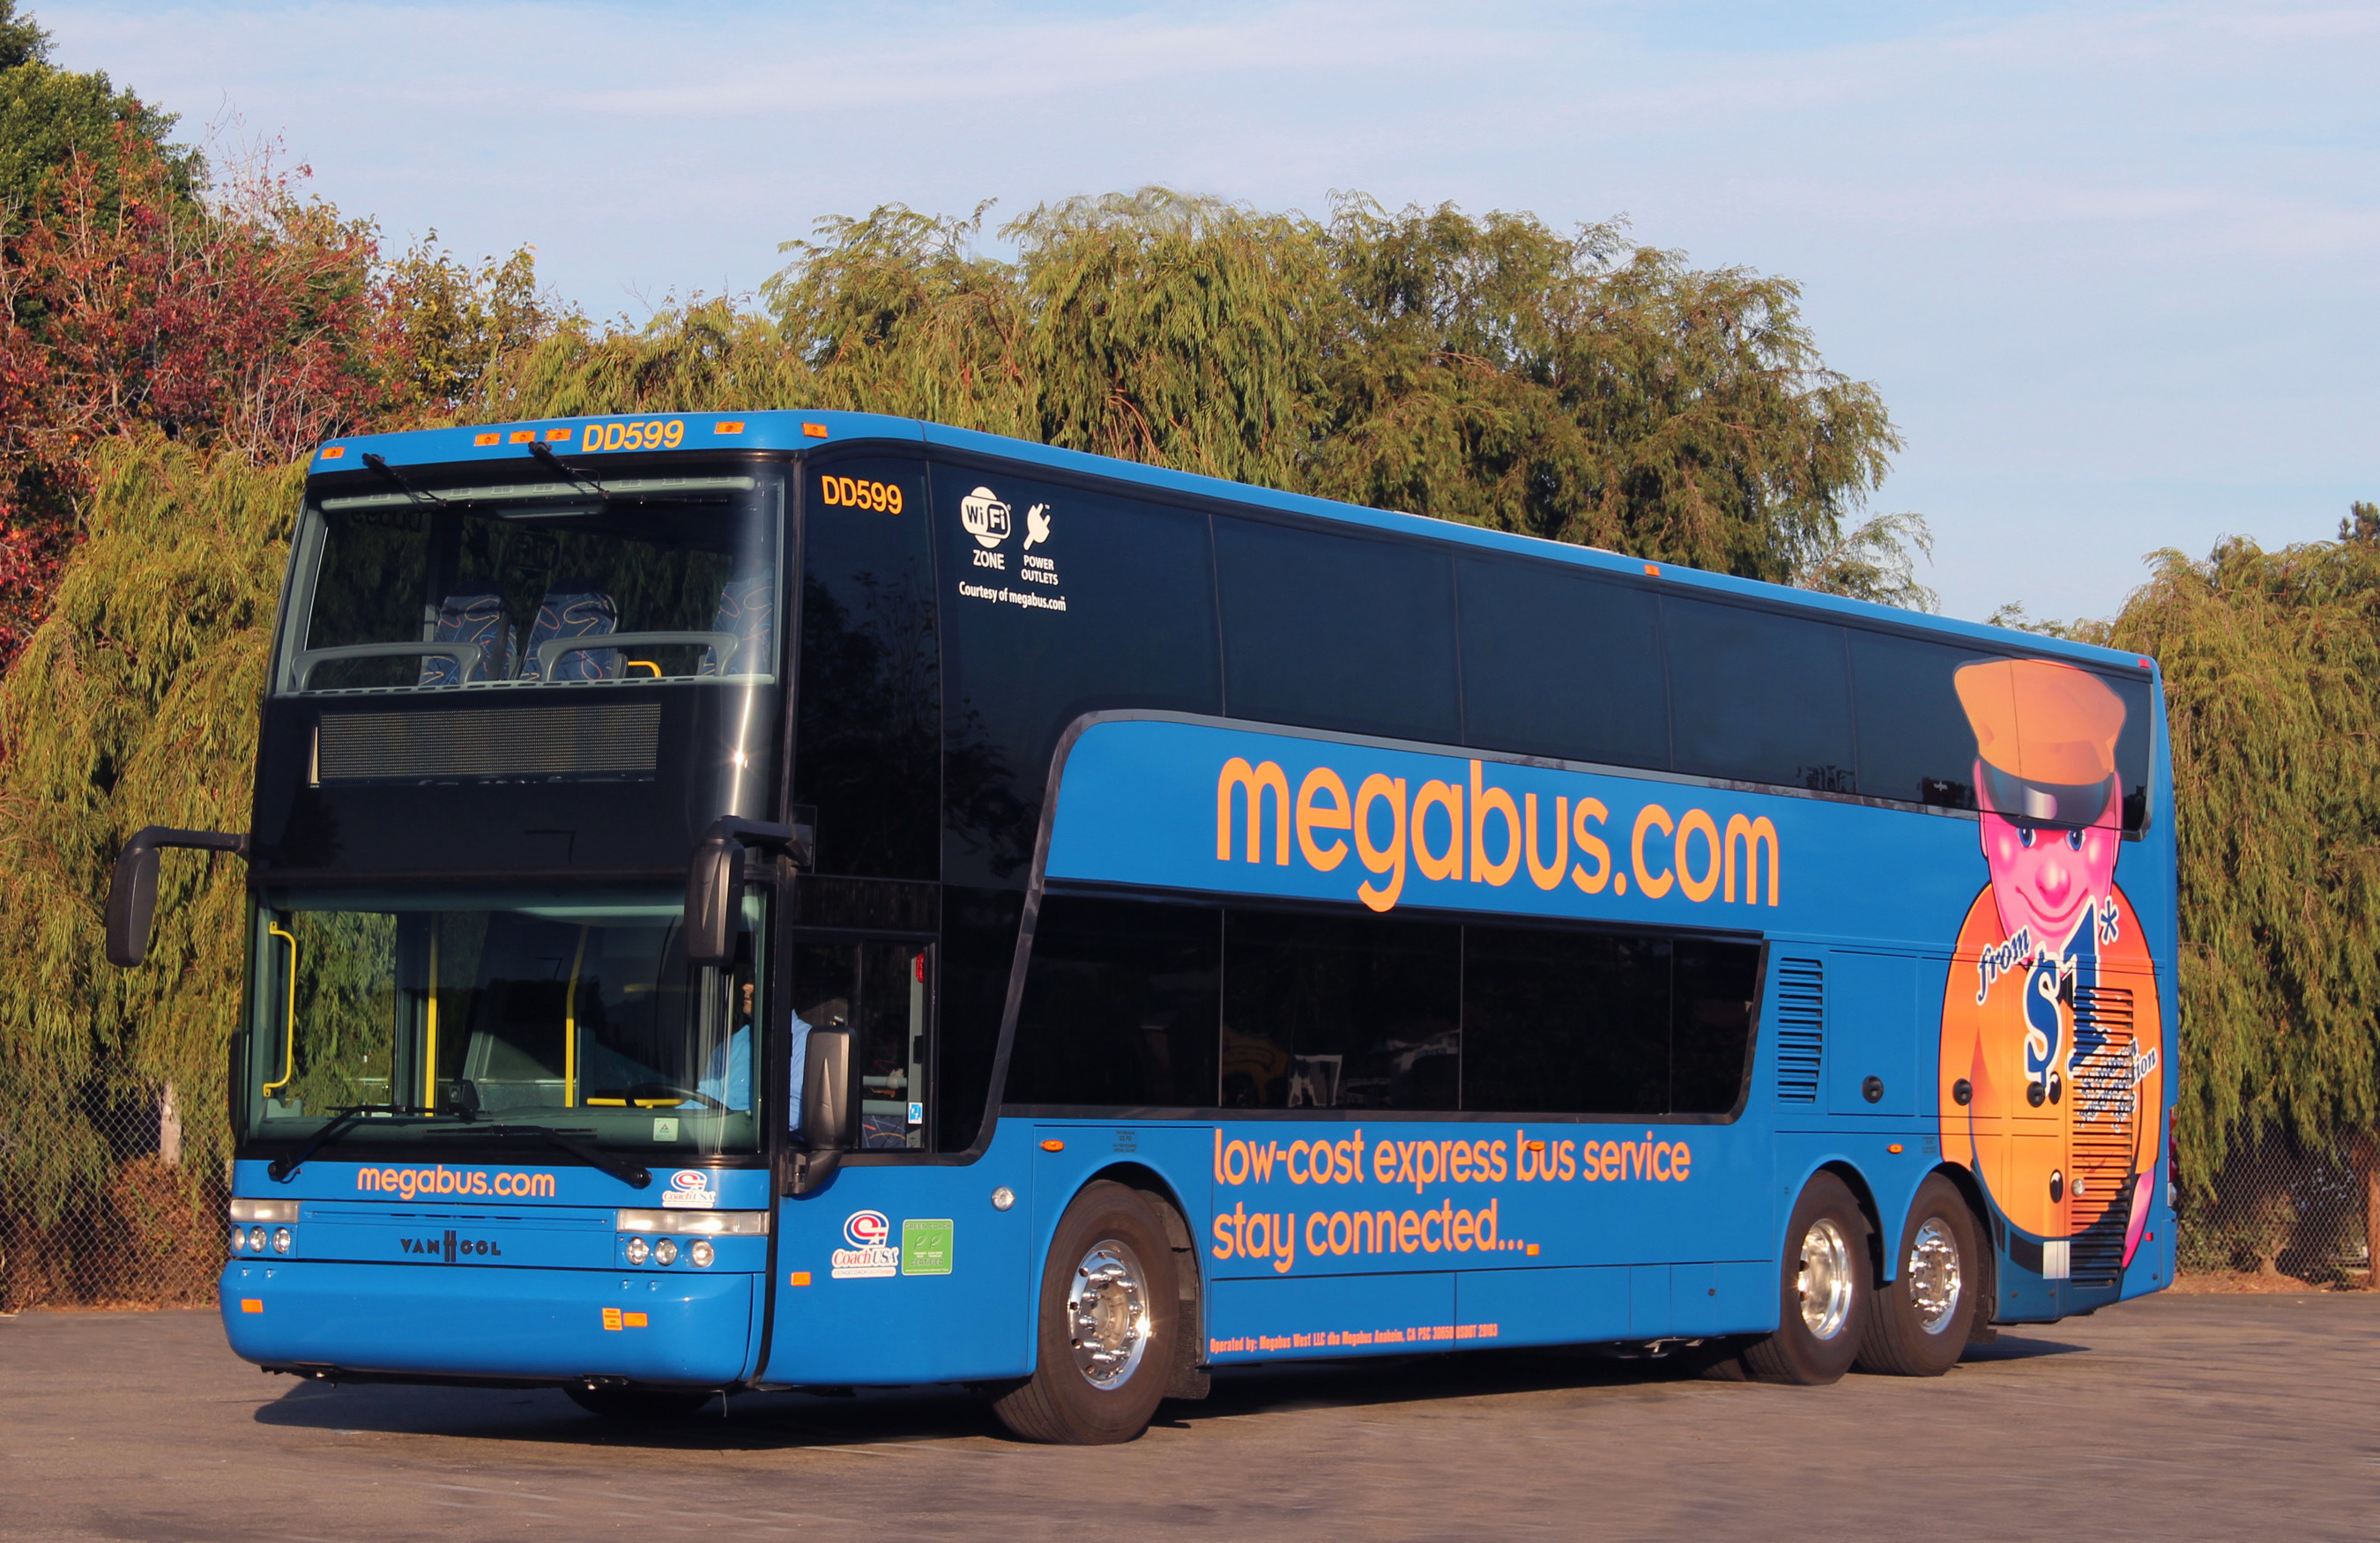 Coach USA and megabus.com - the popular city-to-city, express bus company - today announced a multimillion dollar investment in a hi-tech eco-driving system for their bus operations across the United States to help reduce fuel consumption and carbon emissions, improve customer comfort and cut the risk of accidents.